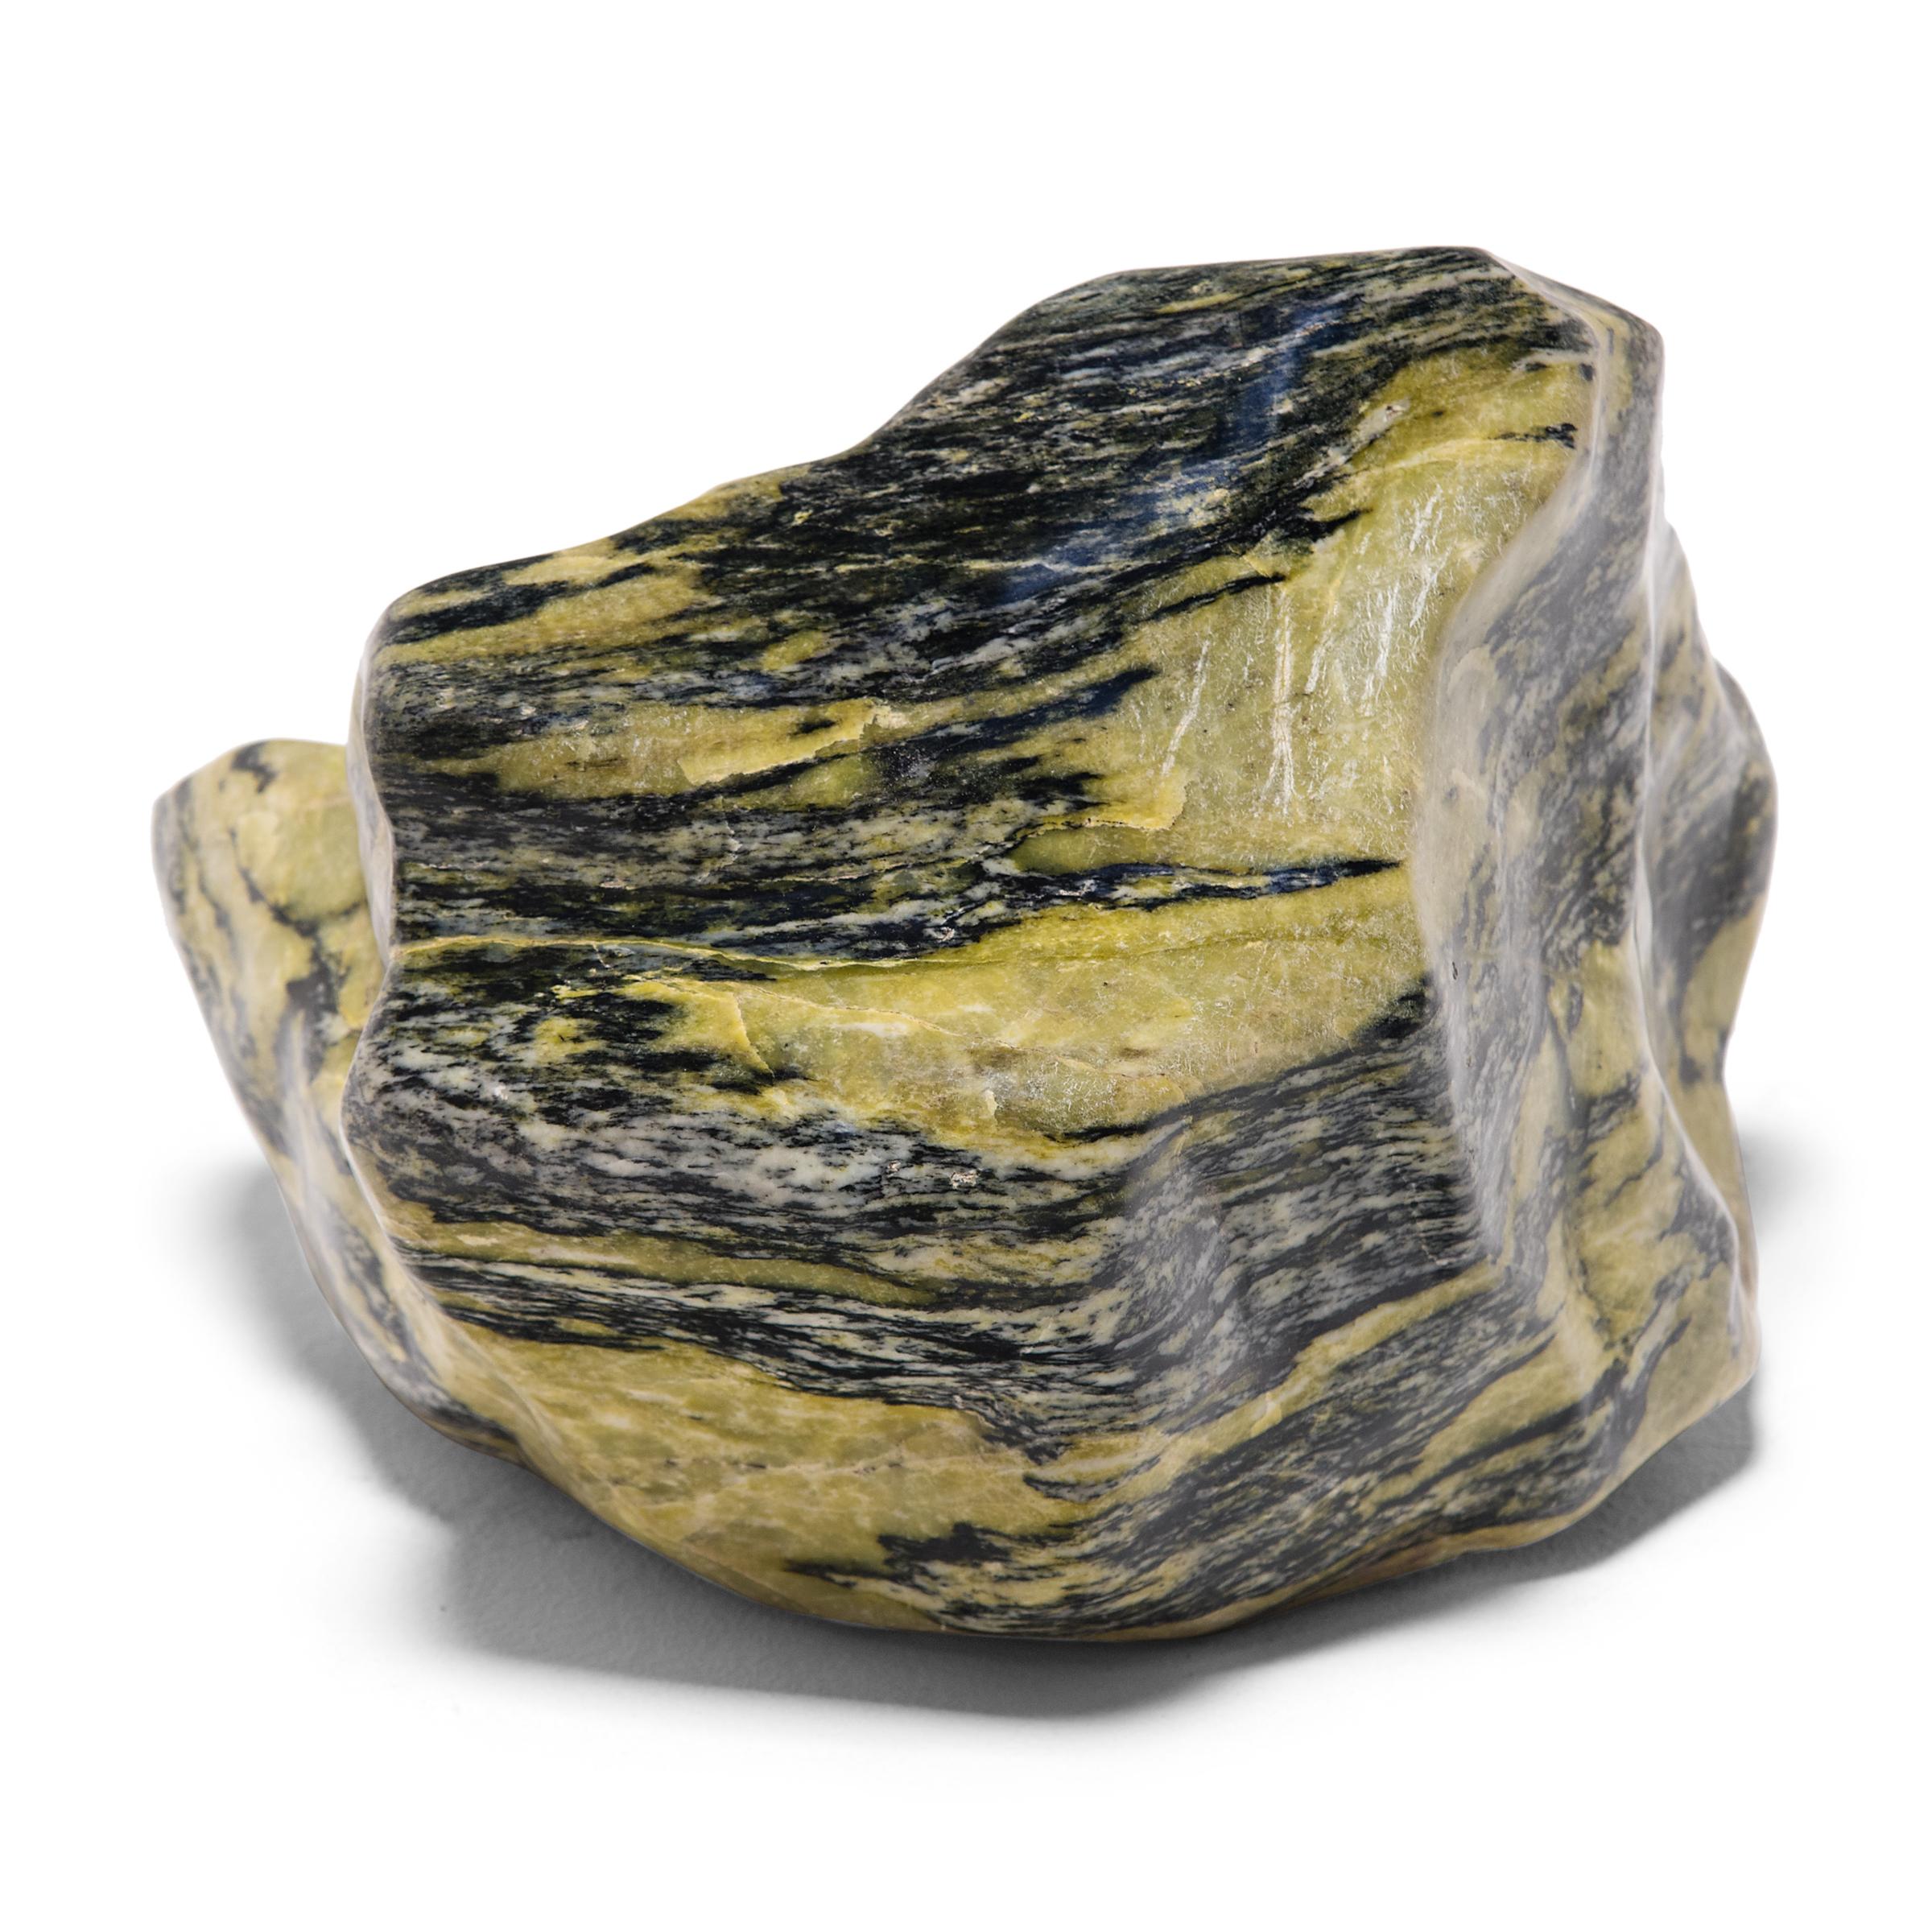 A well-chosen stone is a focal point of both a traditional Chinese garden and a scholar's studio, evoking the complexities of nature and inspiring creative thought. Sourced from China's Dongbei province, this meditation stone has a mesmerizing